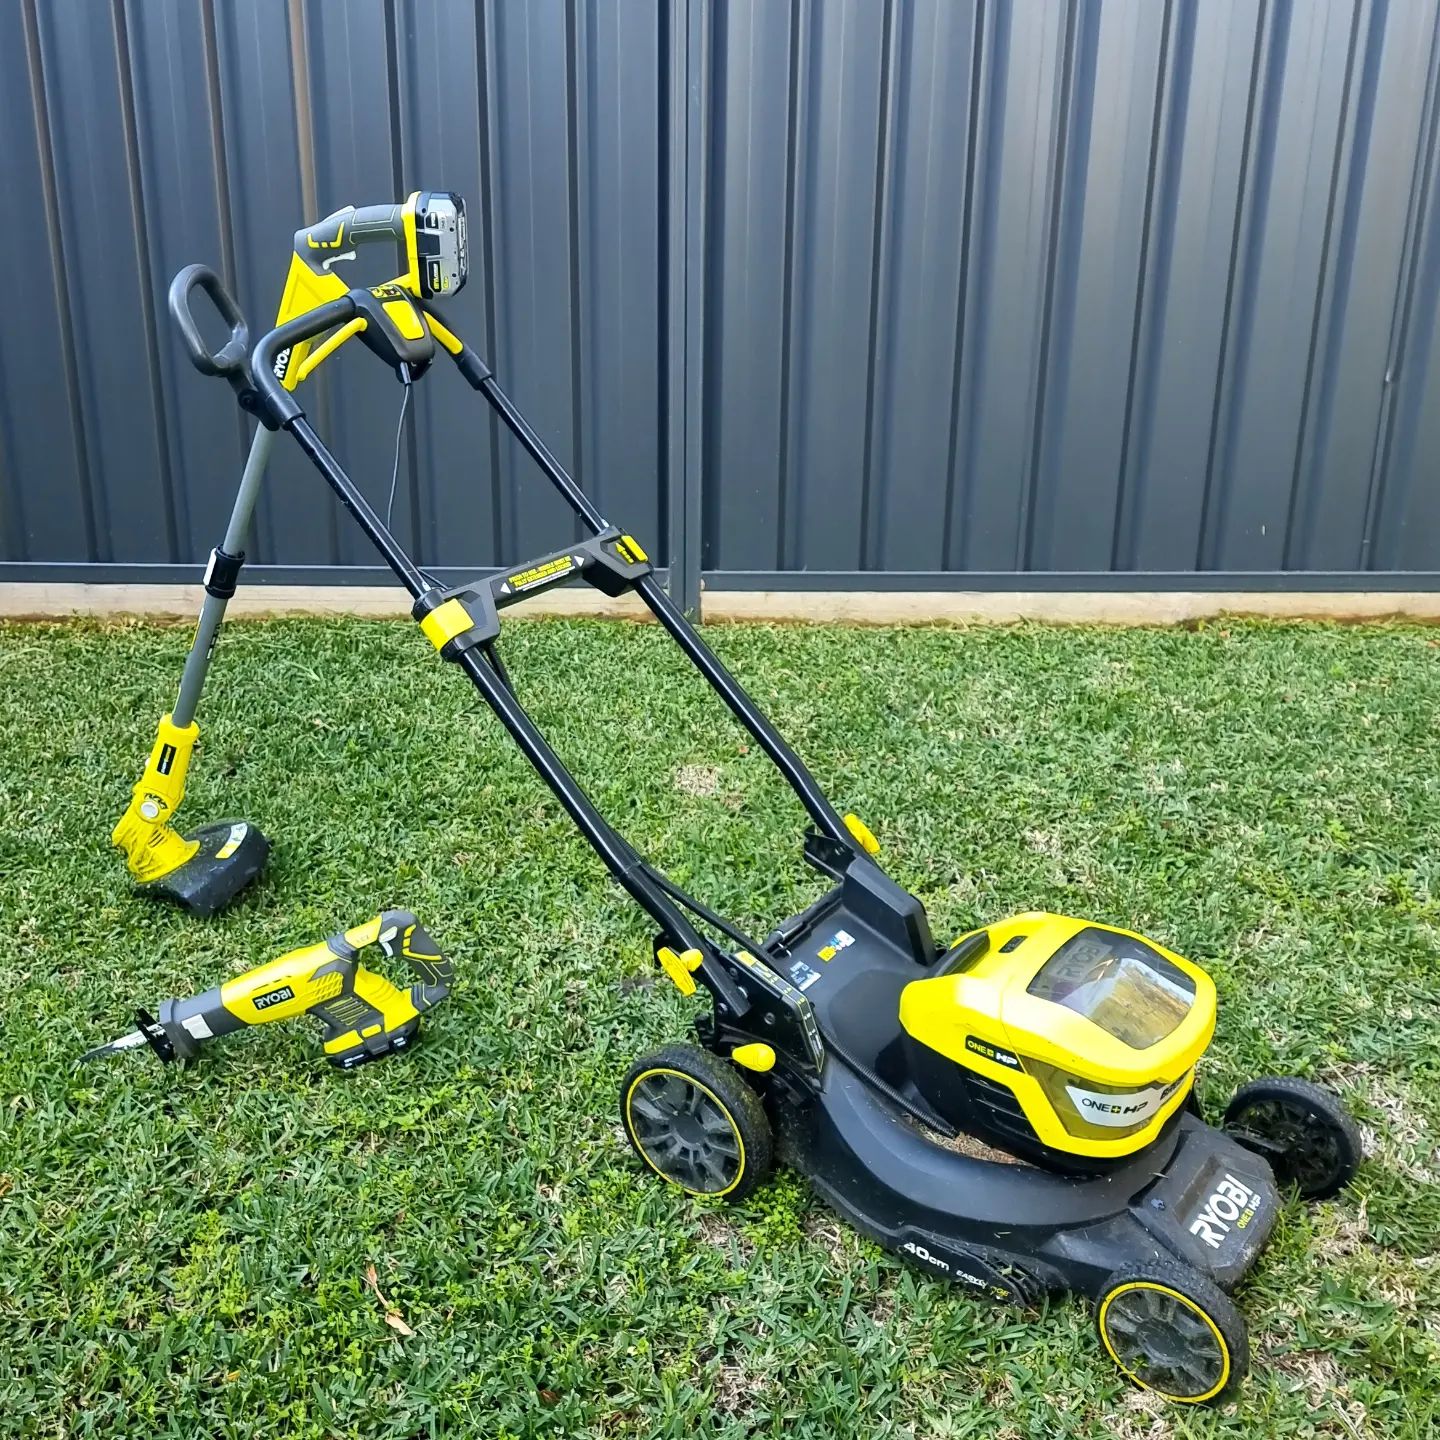 Thank goodness for ryobiau & a rain free weekend!
After weeks of rain I finally got some yard maintenance done. 

Next job is to tackle the weeds that have taken over the lawn. So if you have any tips let me know. 

#ryobiau #ryobipowertools #ryobigardentools #ryobiaustralia #yardwork #gardenlife #lawnmaintenance #ryobimade